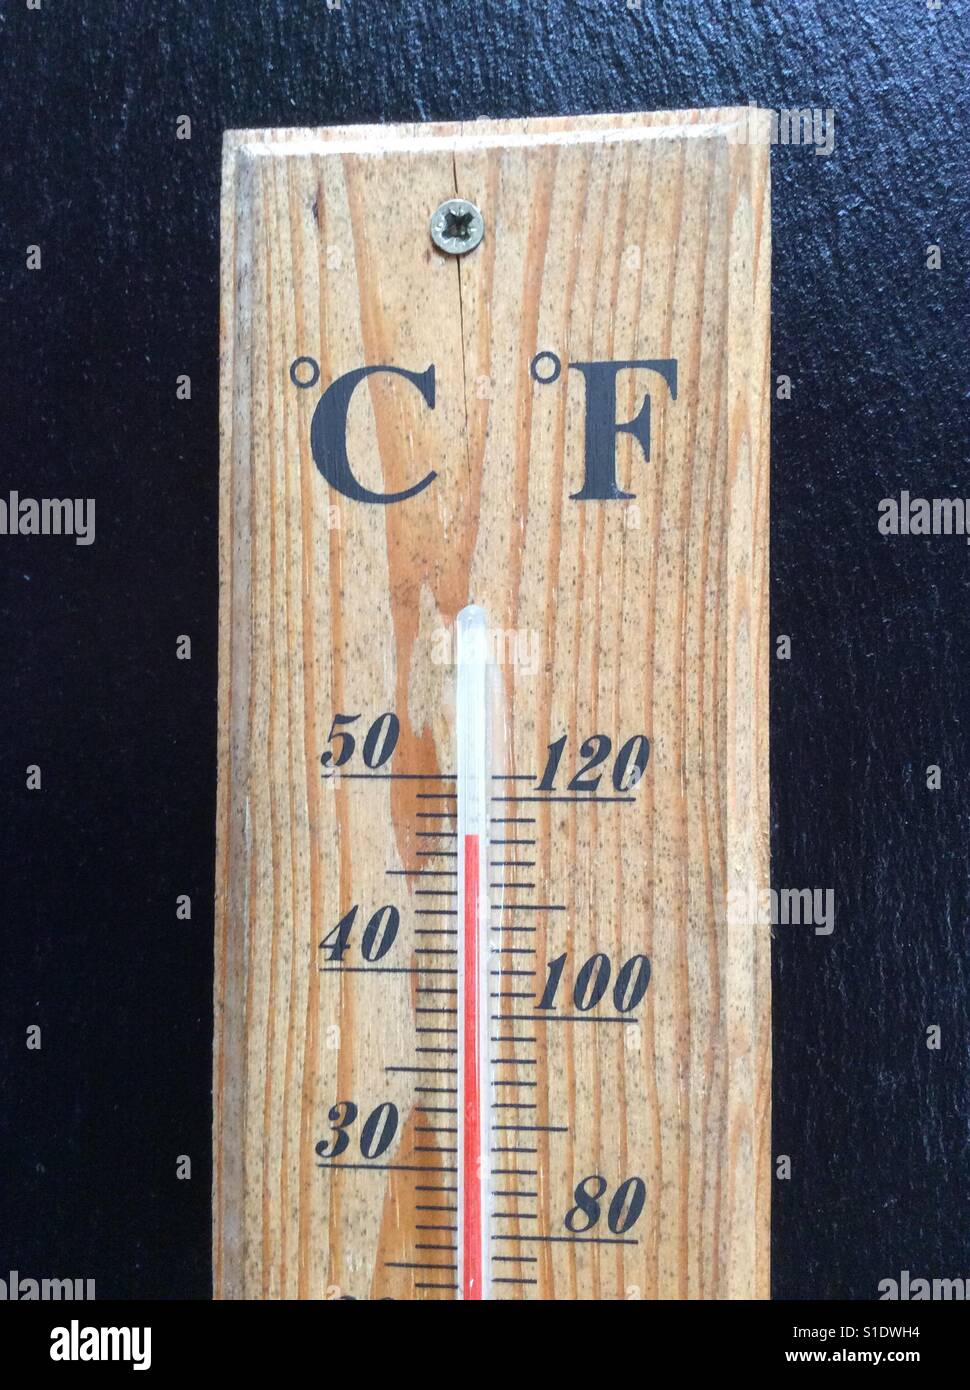 Thermometer to measure the ambient temperature in centigrades, grades and F  Stock Photo - Alamy